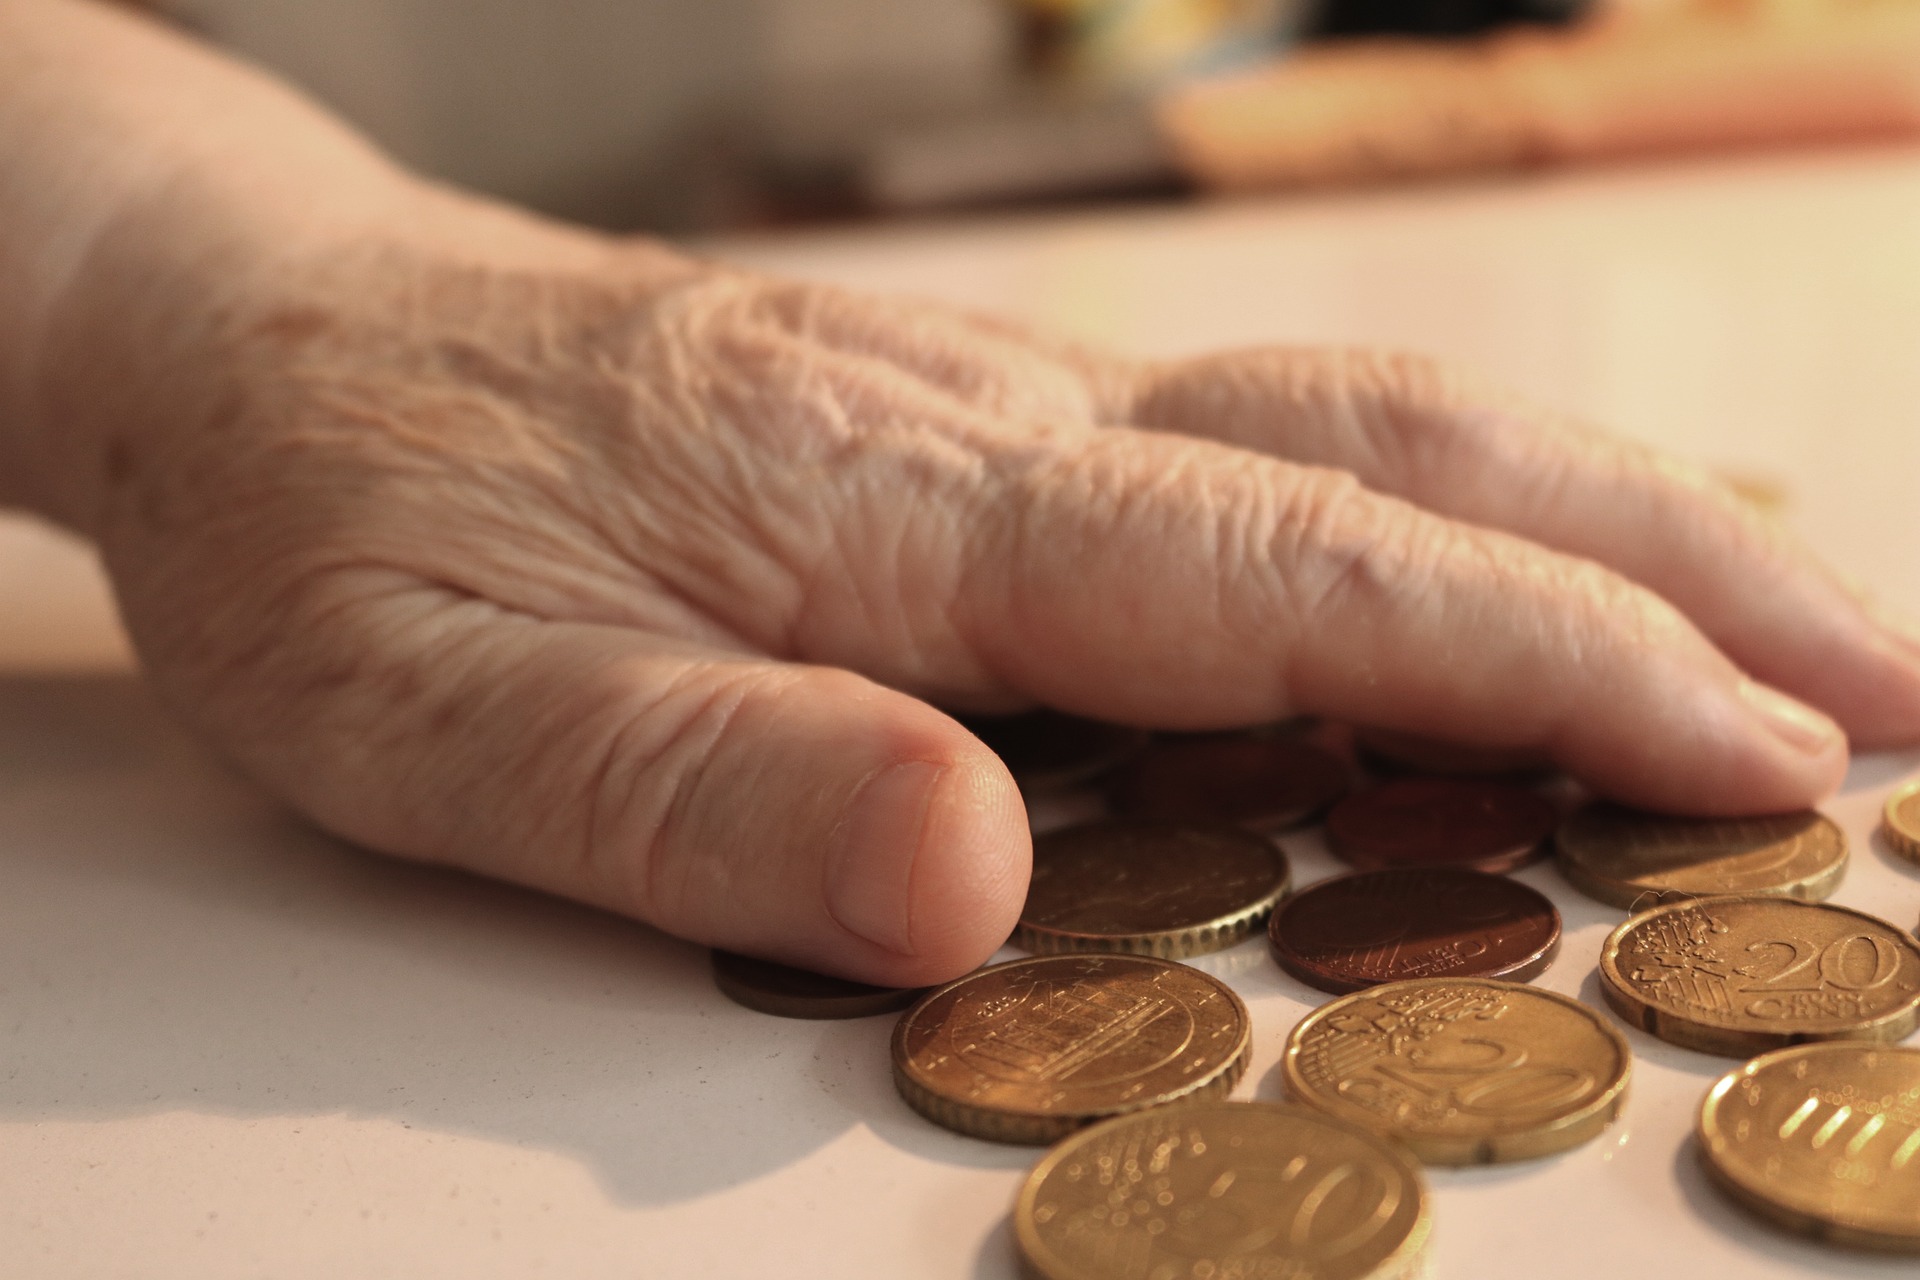 Rising cost of living forcing parents to dip into retirement funds, Killik & Co research finds